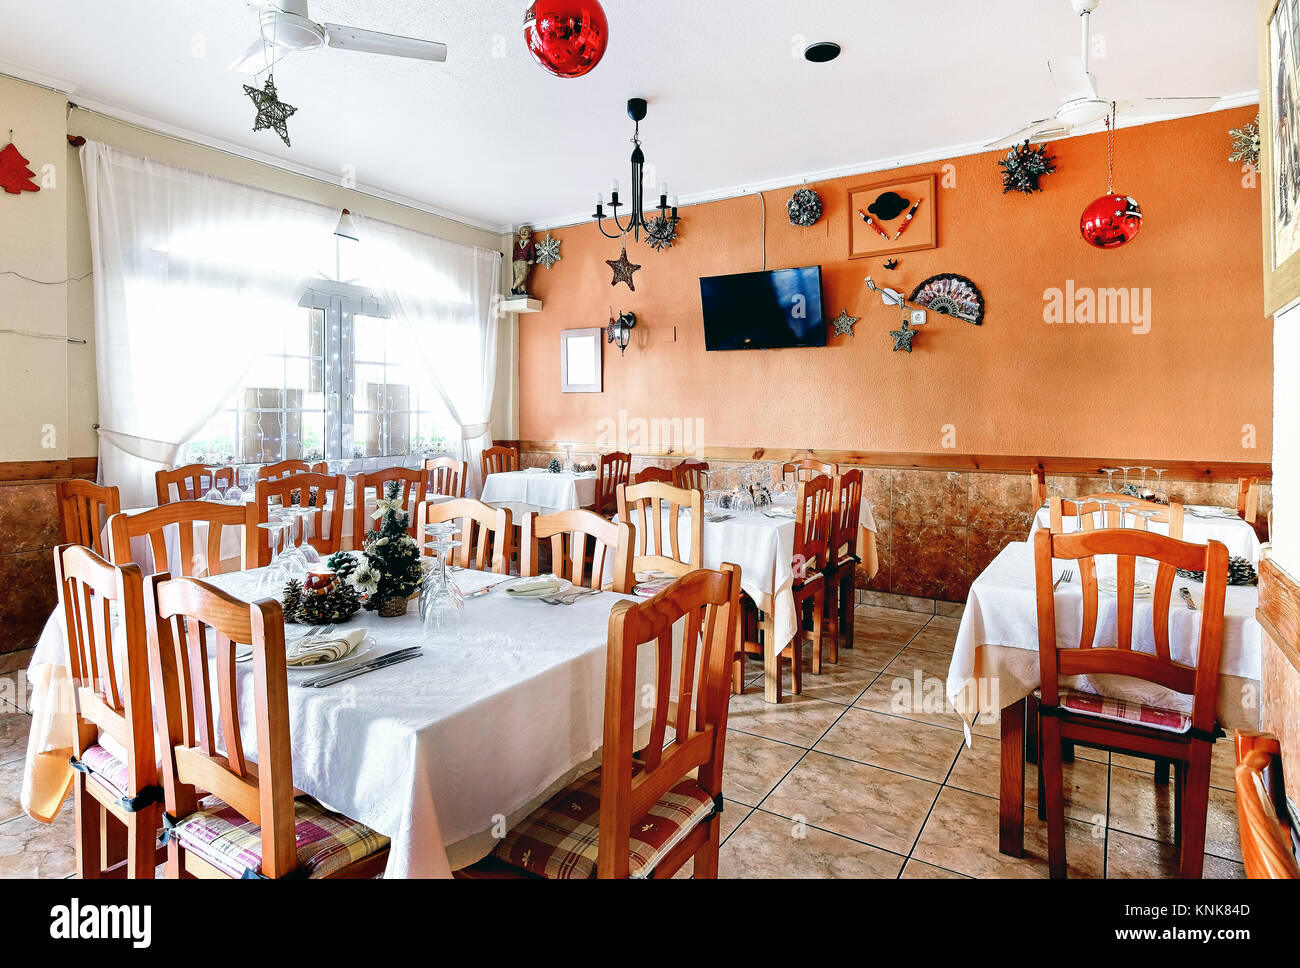 Restaurant interior with Christmas decorations Stock Photo